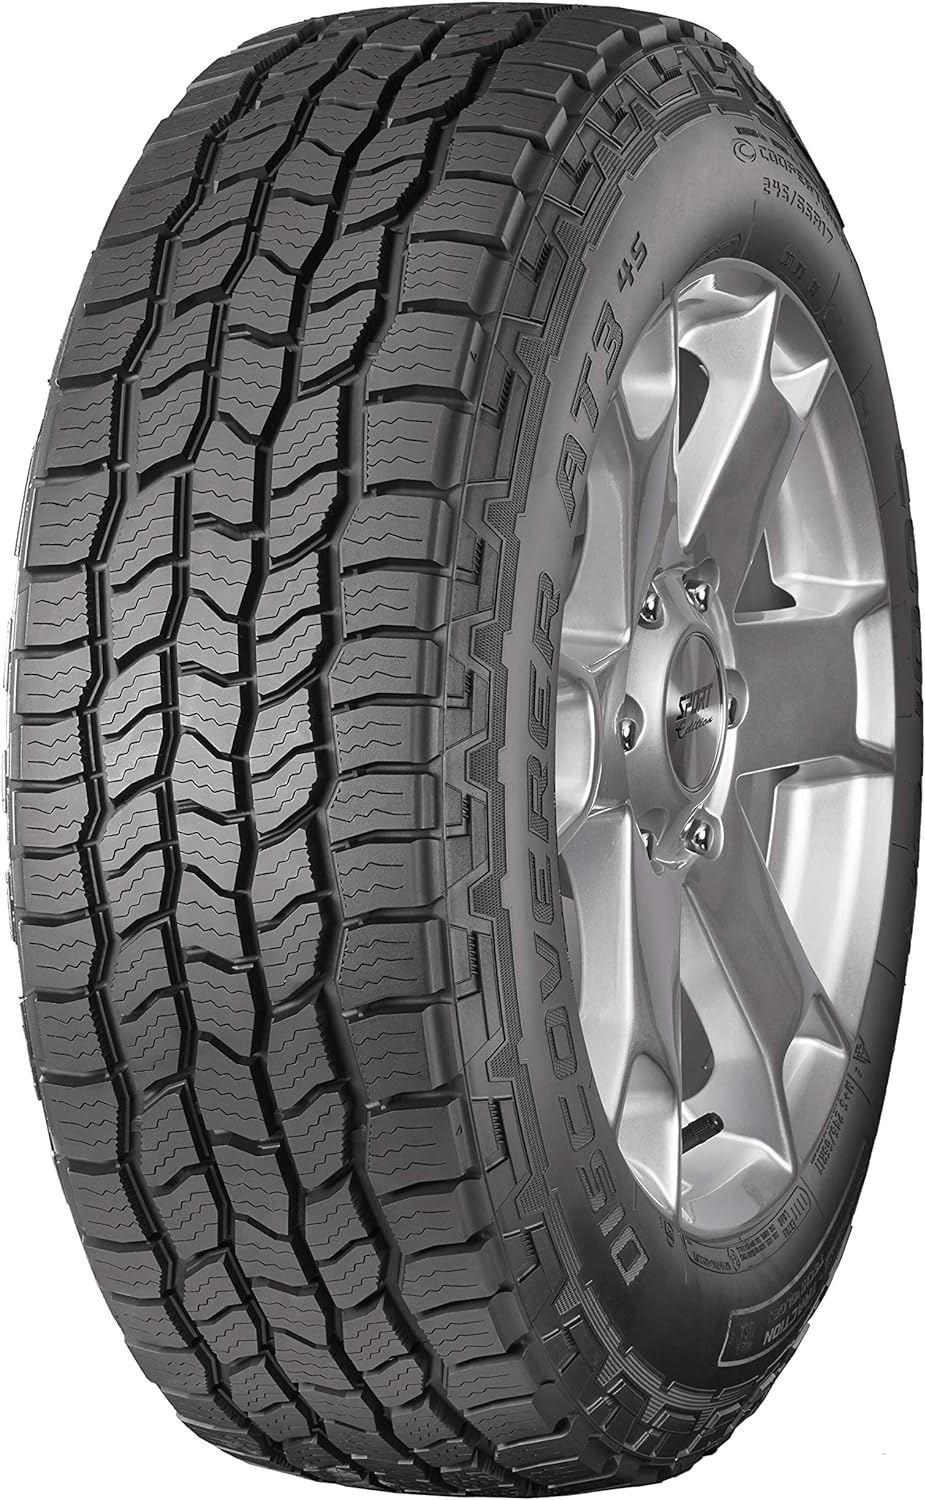 Cooper Discoverer AT3 4S All-Season 265/70R15 112T Tire